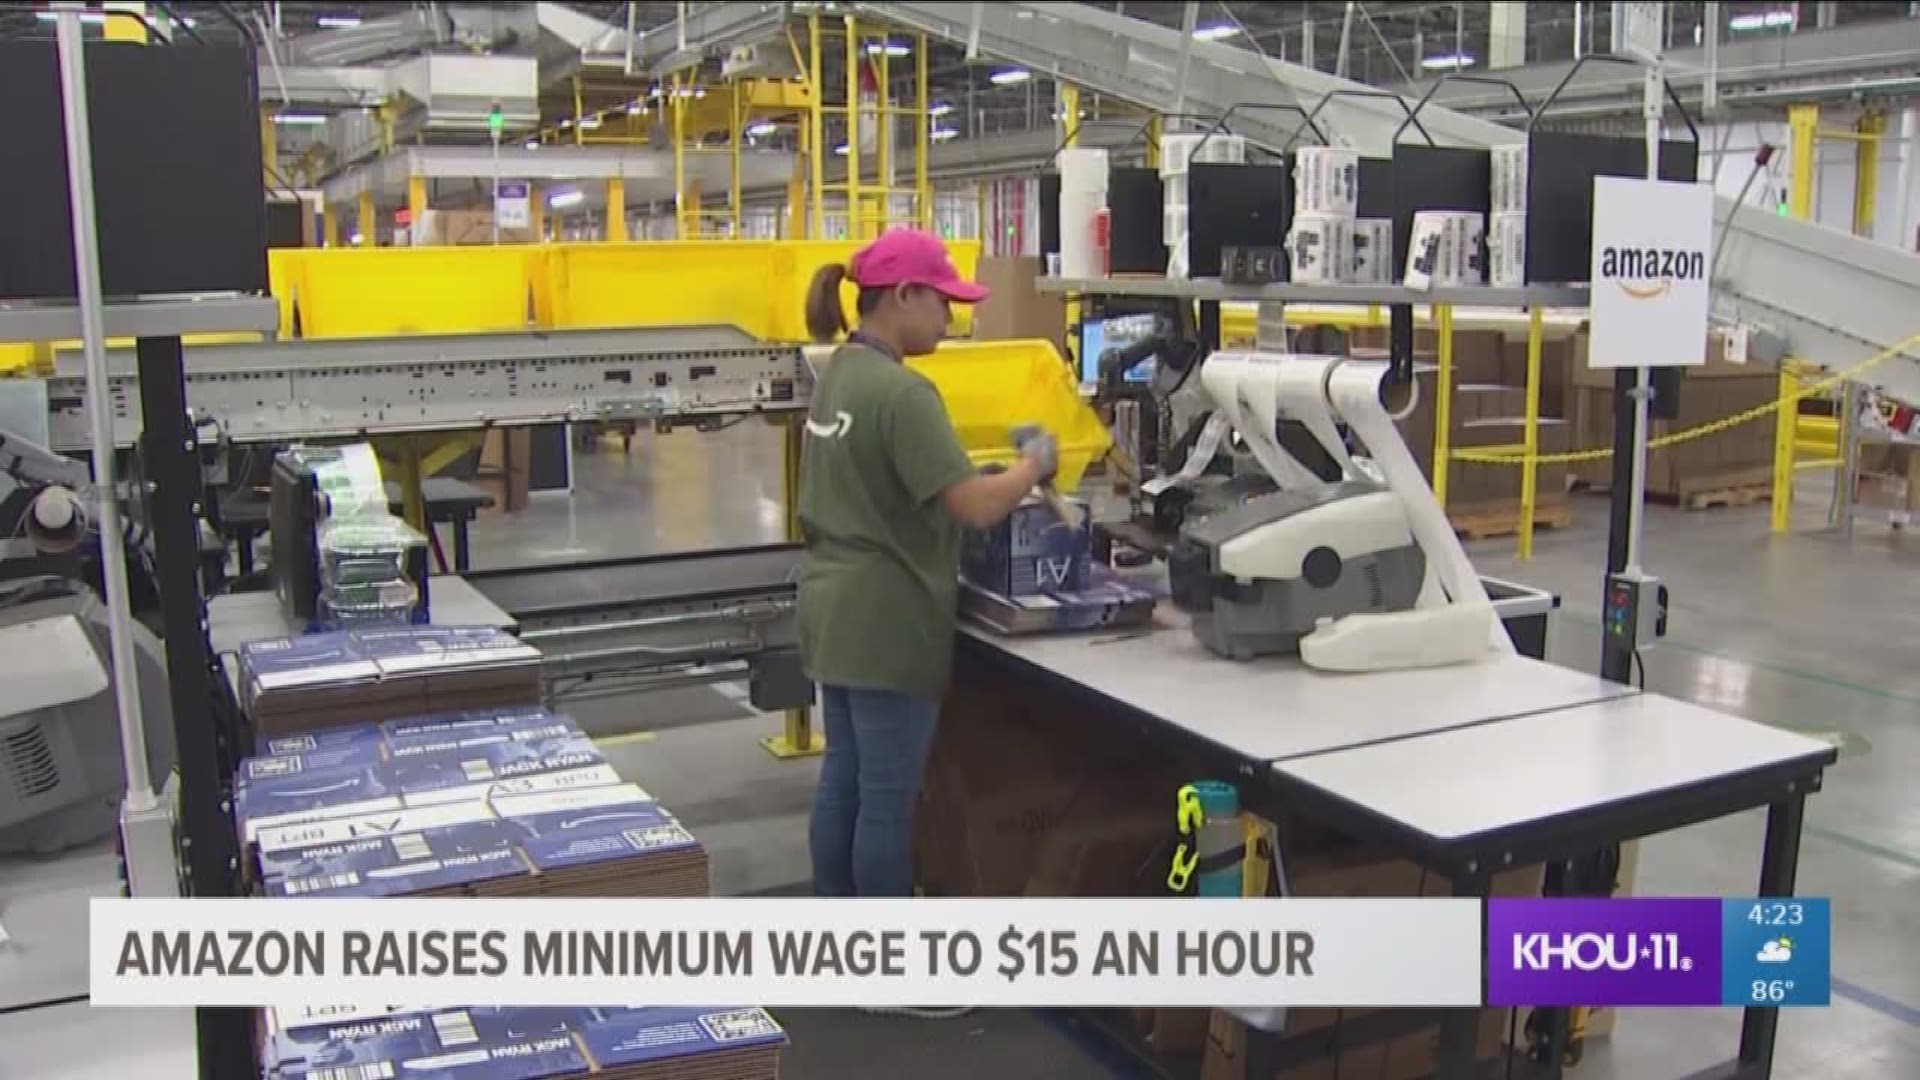 Amazon recently announced that the company is raising its minimum wage to $15 an hour. The pay raise starts next month and that includes part-time, seasonal and temporary employees.